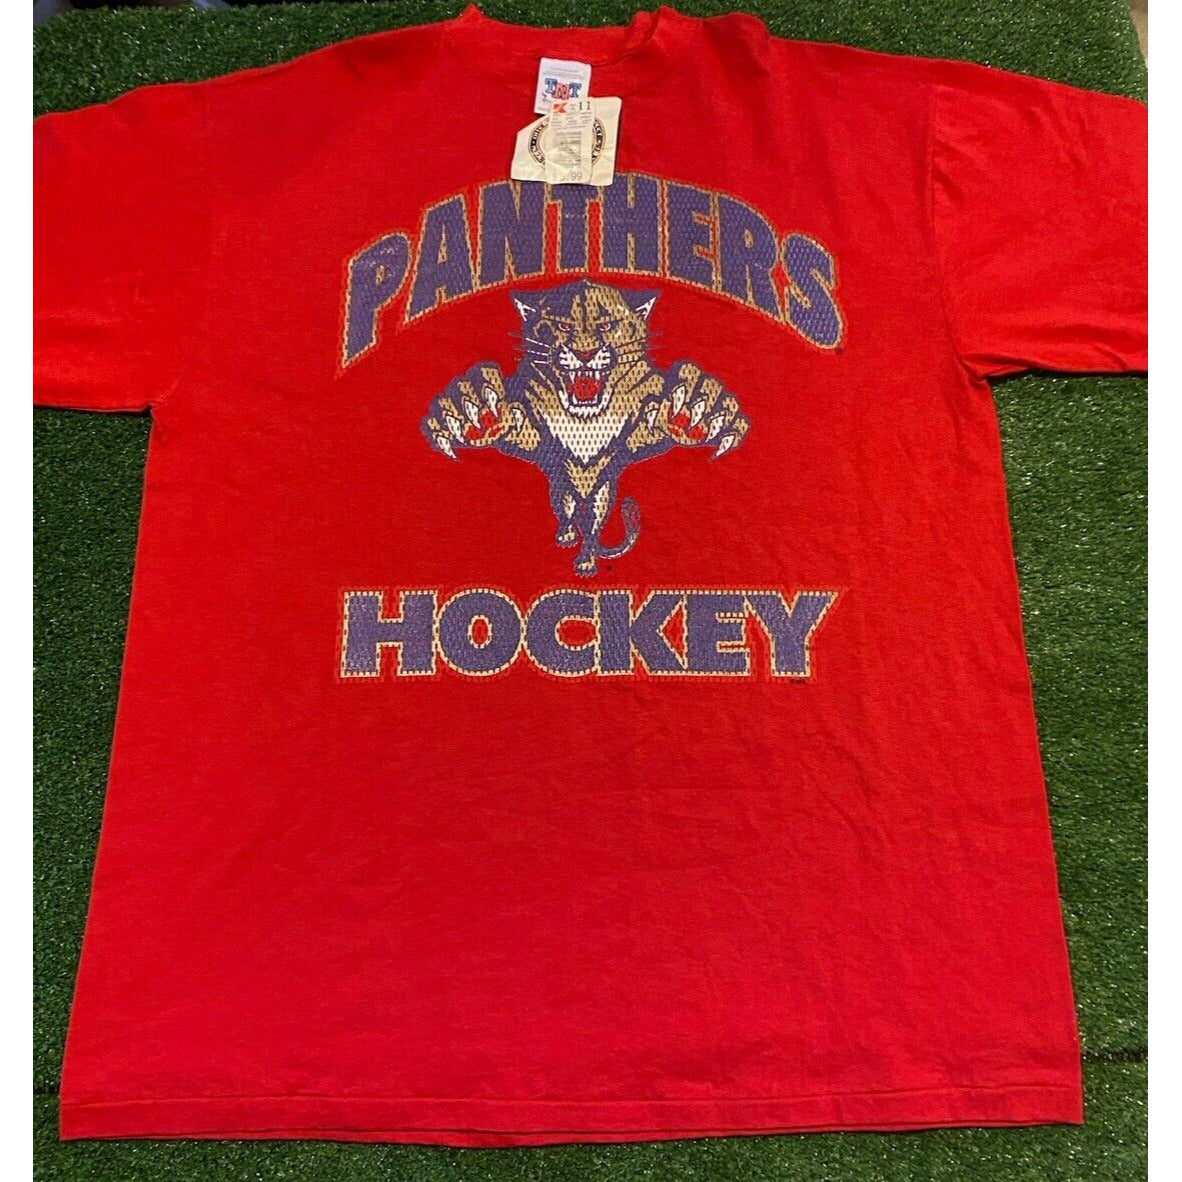 Vintage Florida Panthers shirt extra large adult red new 90s Trau & Loevner